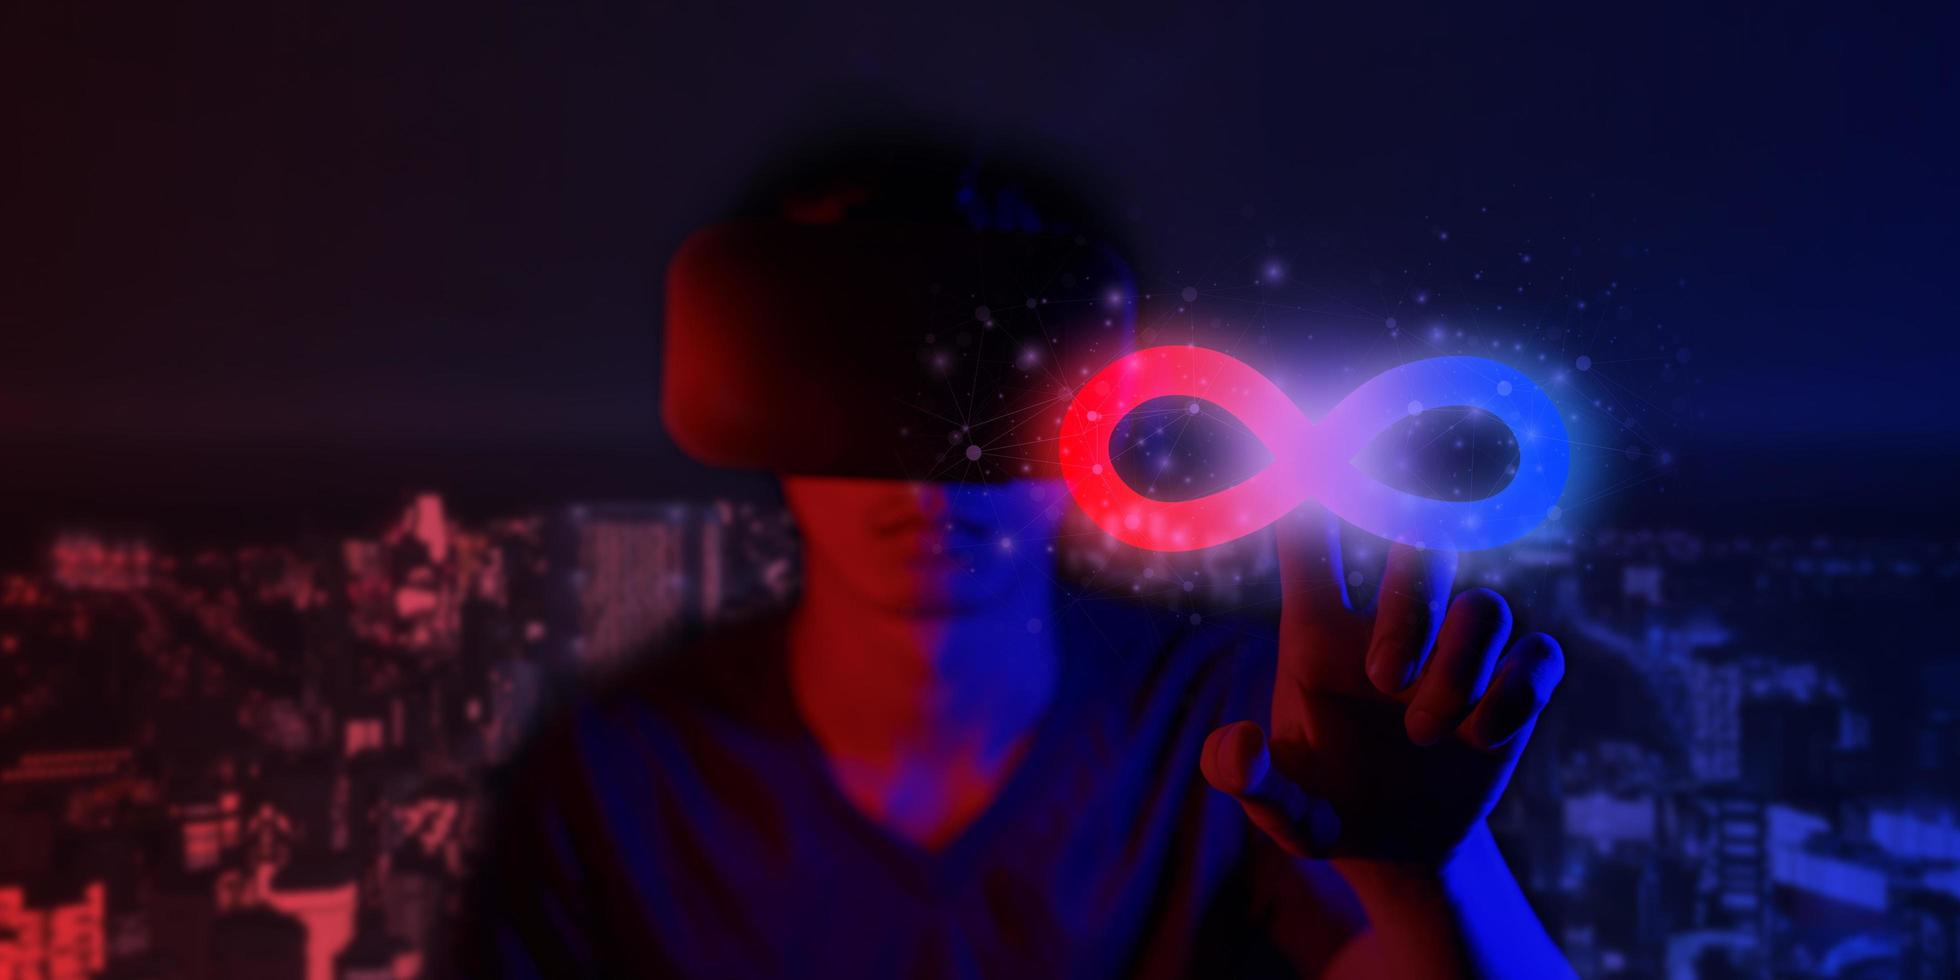 virtual reality infinity symbol community connection of metaverse world global network technology system and abstract loop sign element on innovation digital communication photo